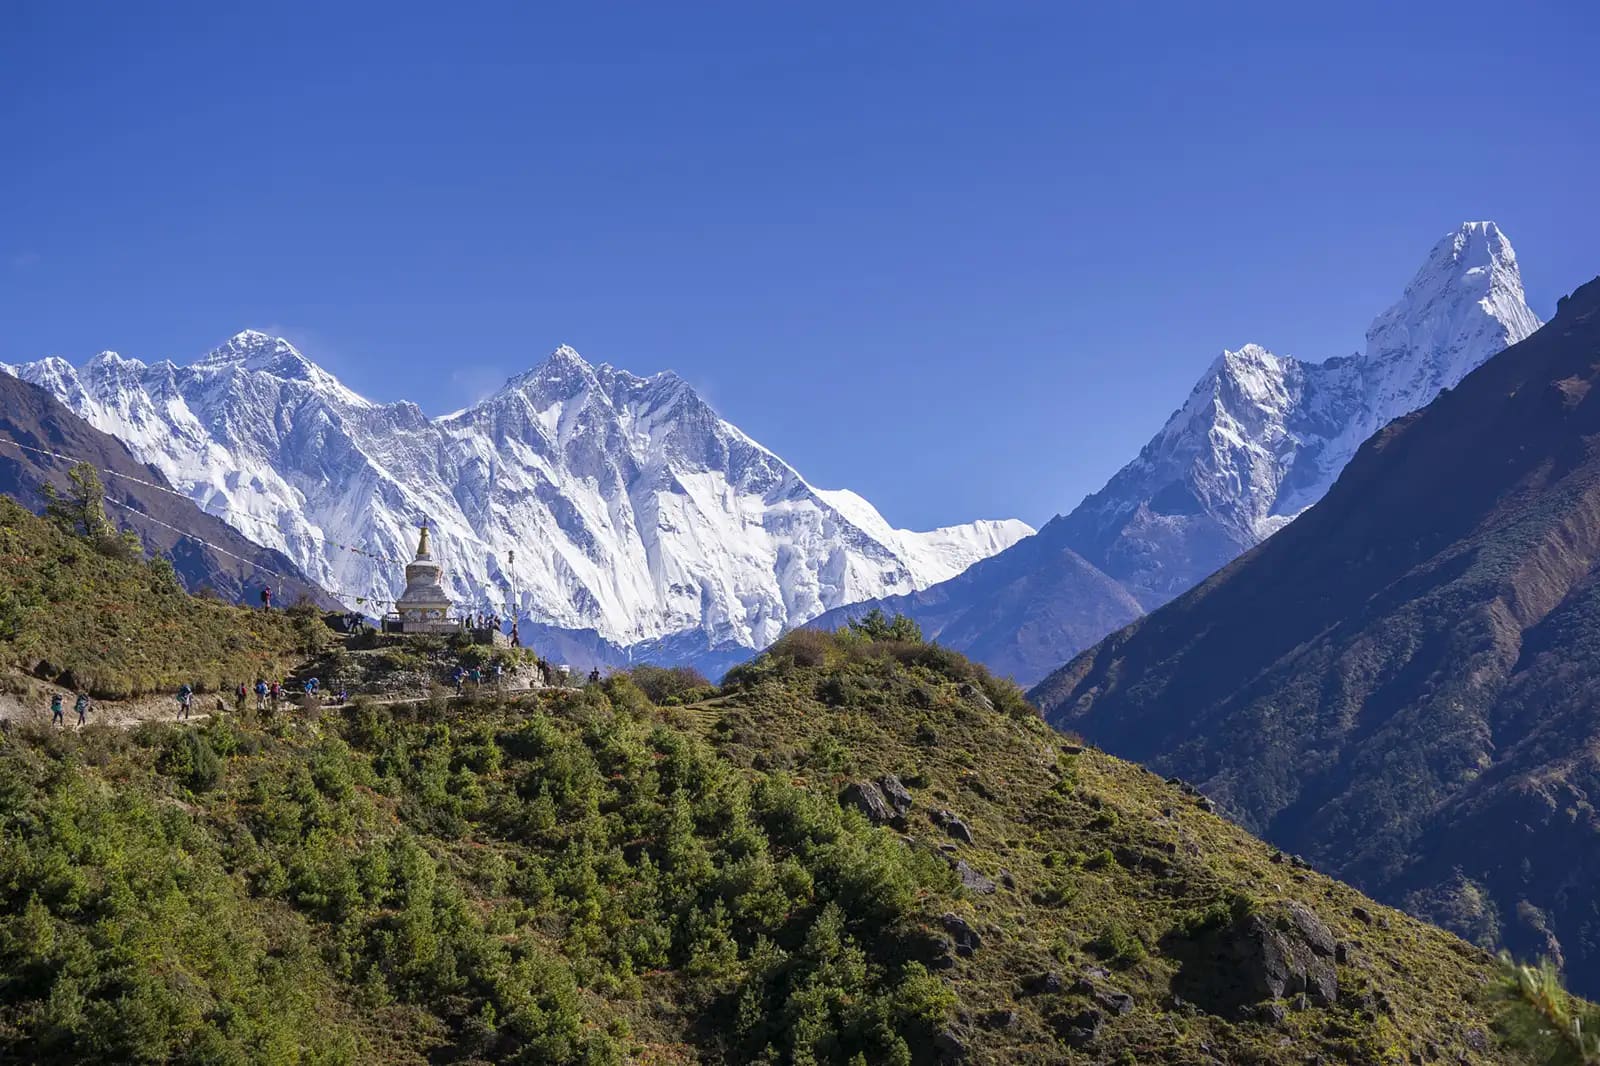 Mount Ama Dablam and its surroundings